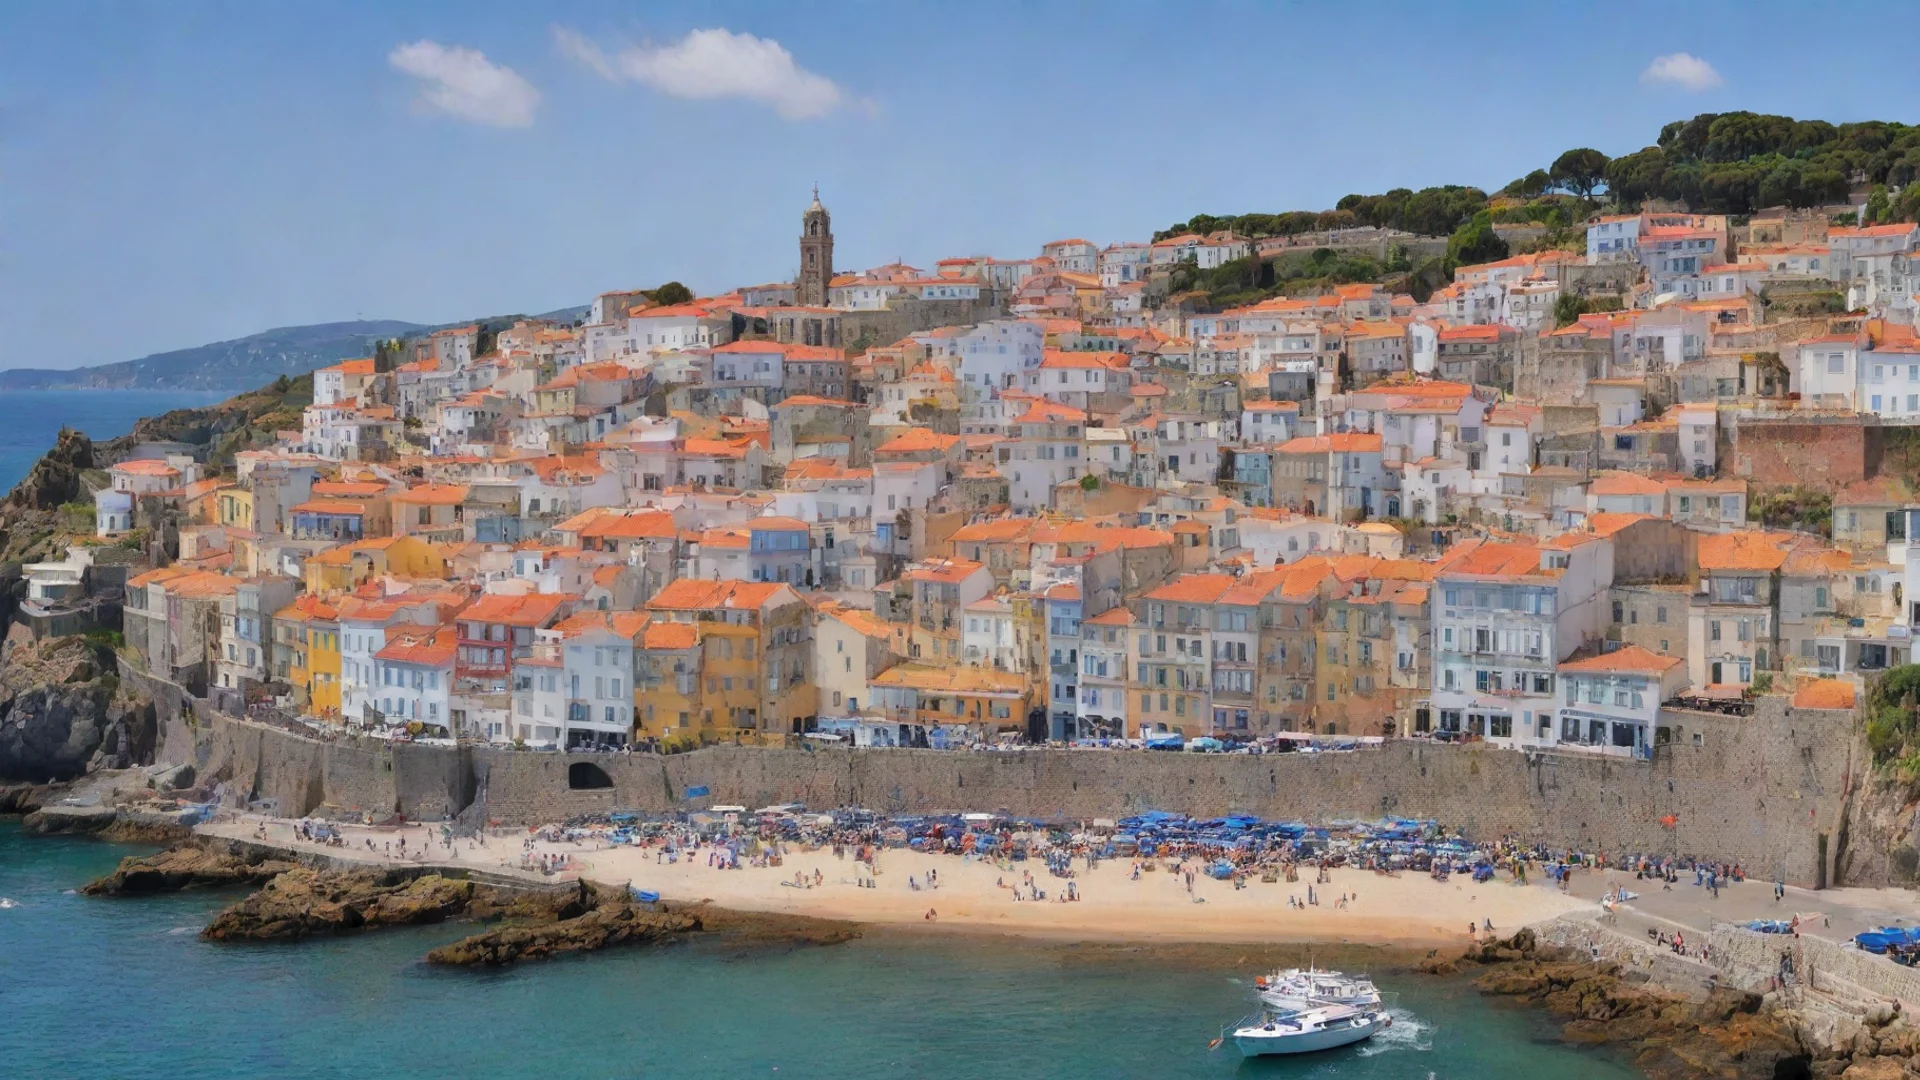 aiamazing busy portuguese coastal town hd aesthetic best quality with strong vibrant colors awesome portrait 2 wide